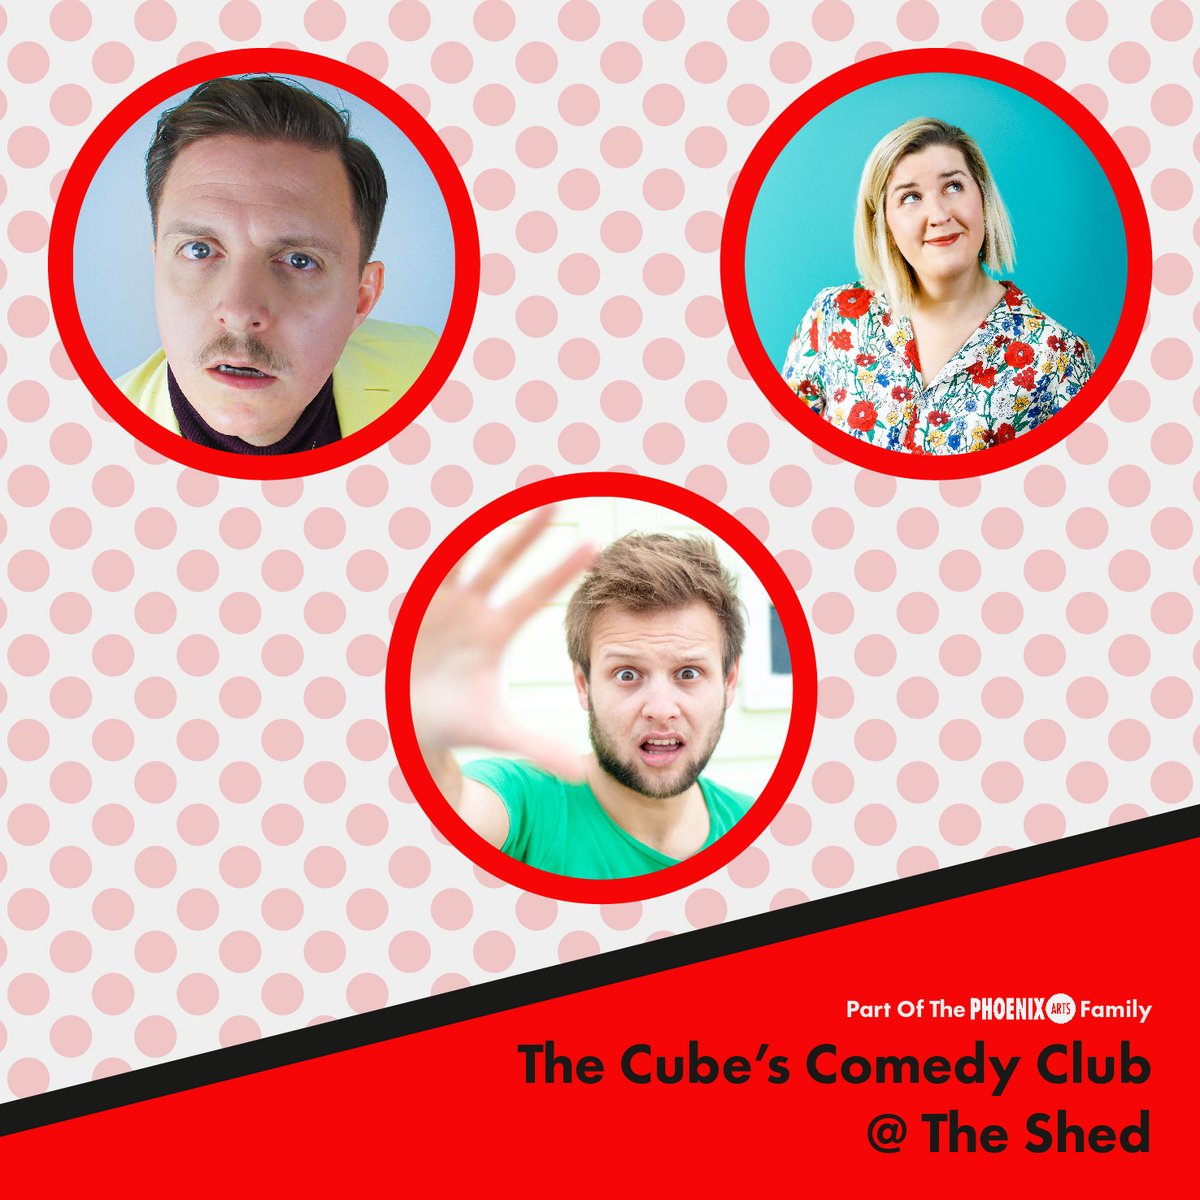 Coming this November to The Cube's Comedy Club is Eva Bindeman, Tom Glover and Joey Page👏 🗓️Thursday 2nd November, 8:00 PM 📍The Cube @ The Shed 🎟️Tickets £12.50 Tickets: bit.ly/TCCCTSN23